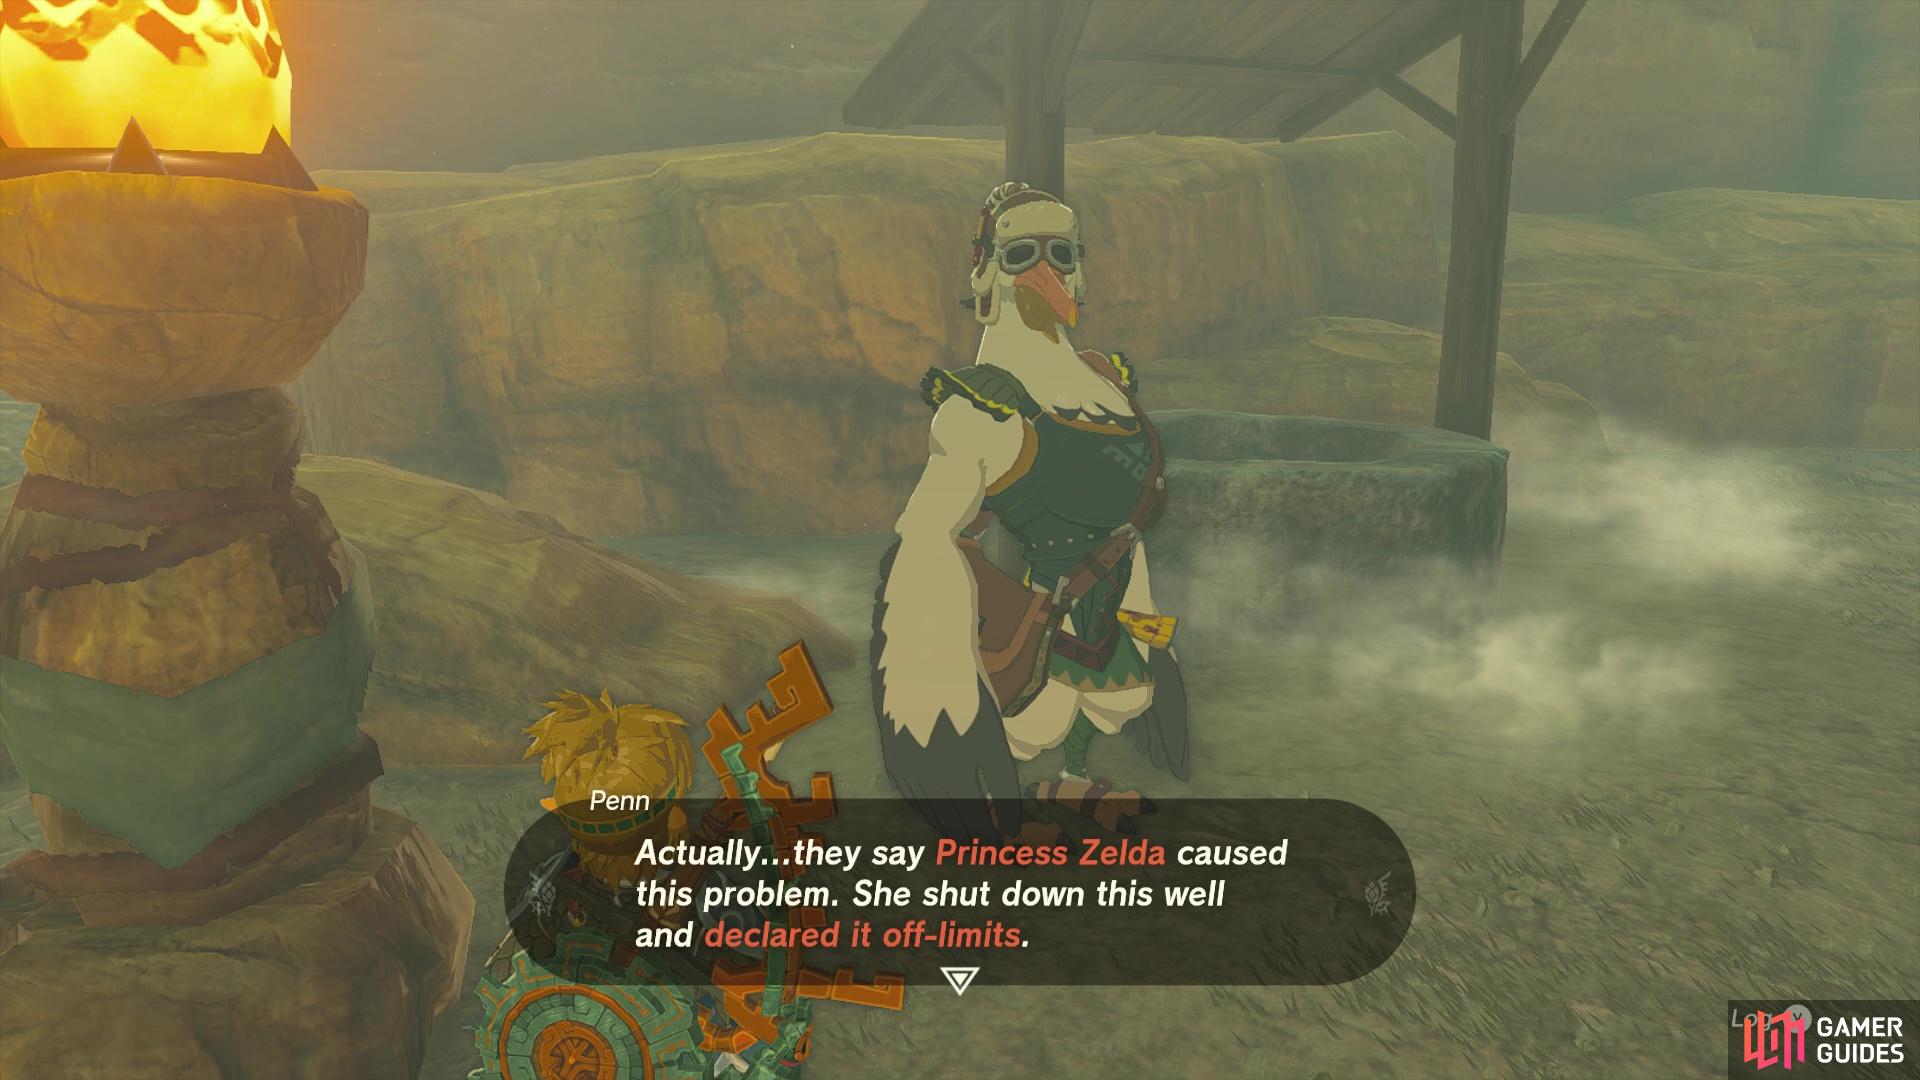 The well is off-limits on Zelda’s orders. 